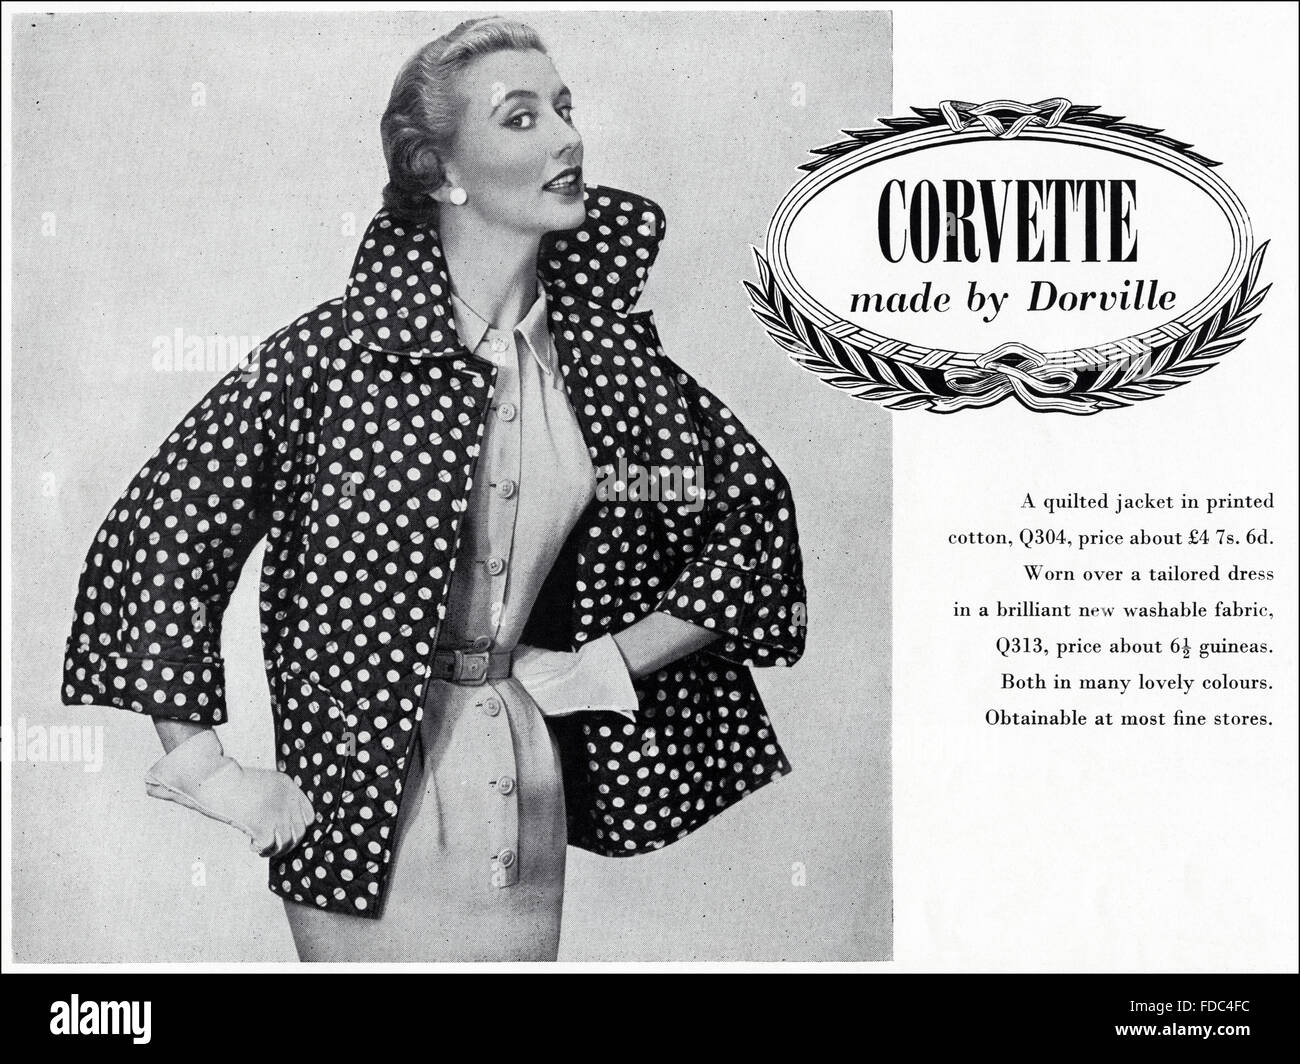 Original vintage advert from 1950s. Advertisement from 1954 advertising women's fashion Corvette made by Dorville. Stock Photo